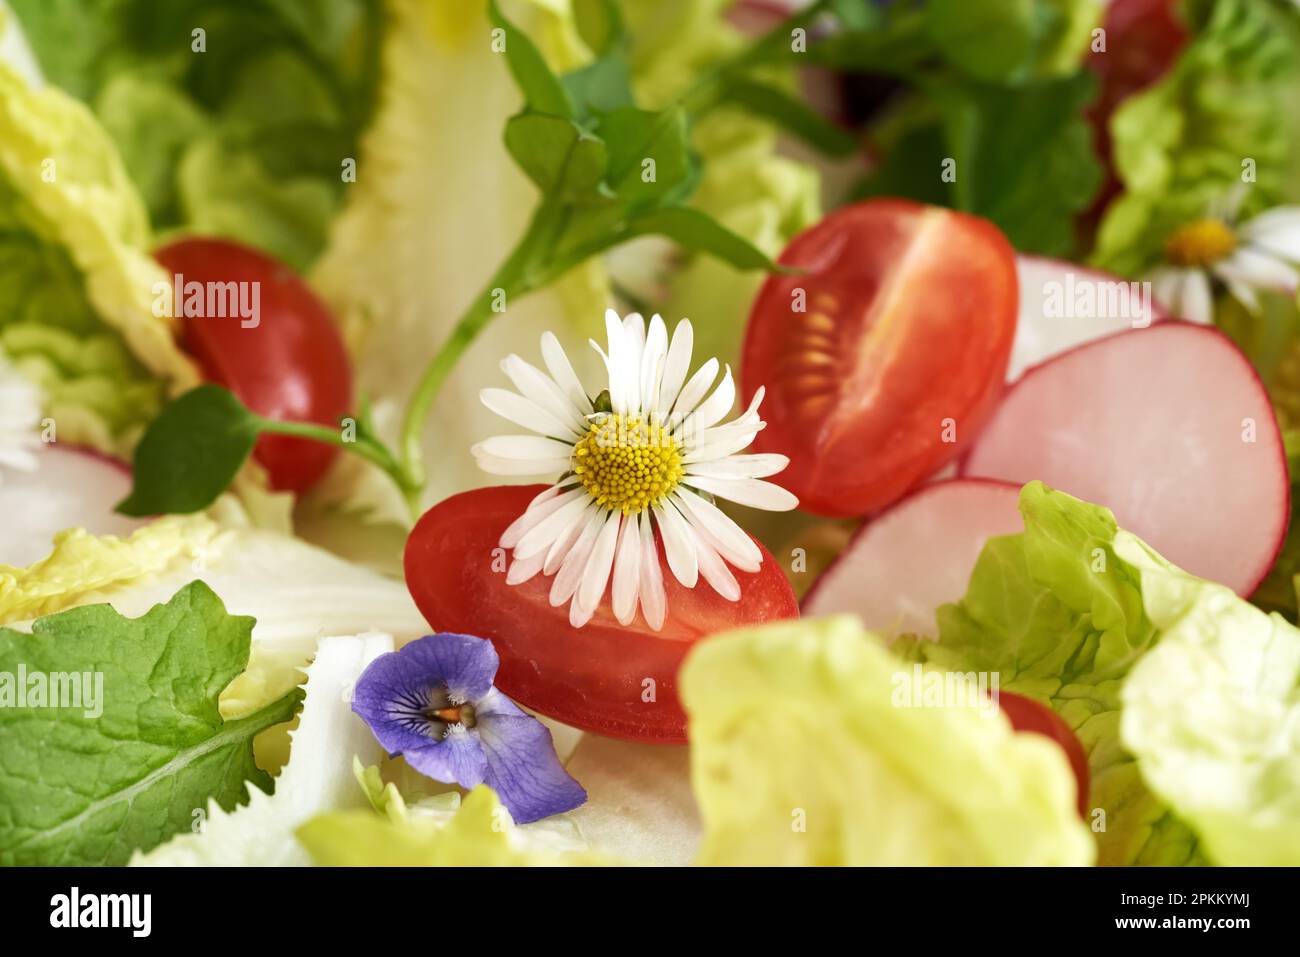 Closeup of a wild edible flowers in vegetable salad in spring Stock Photo